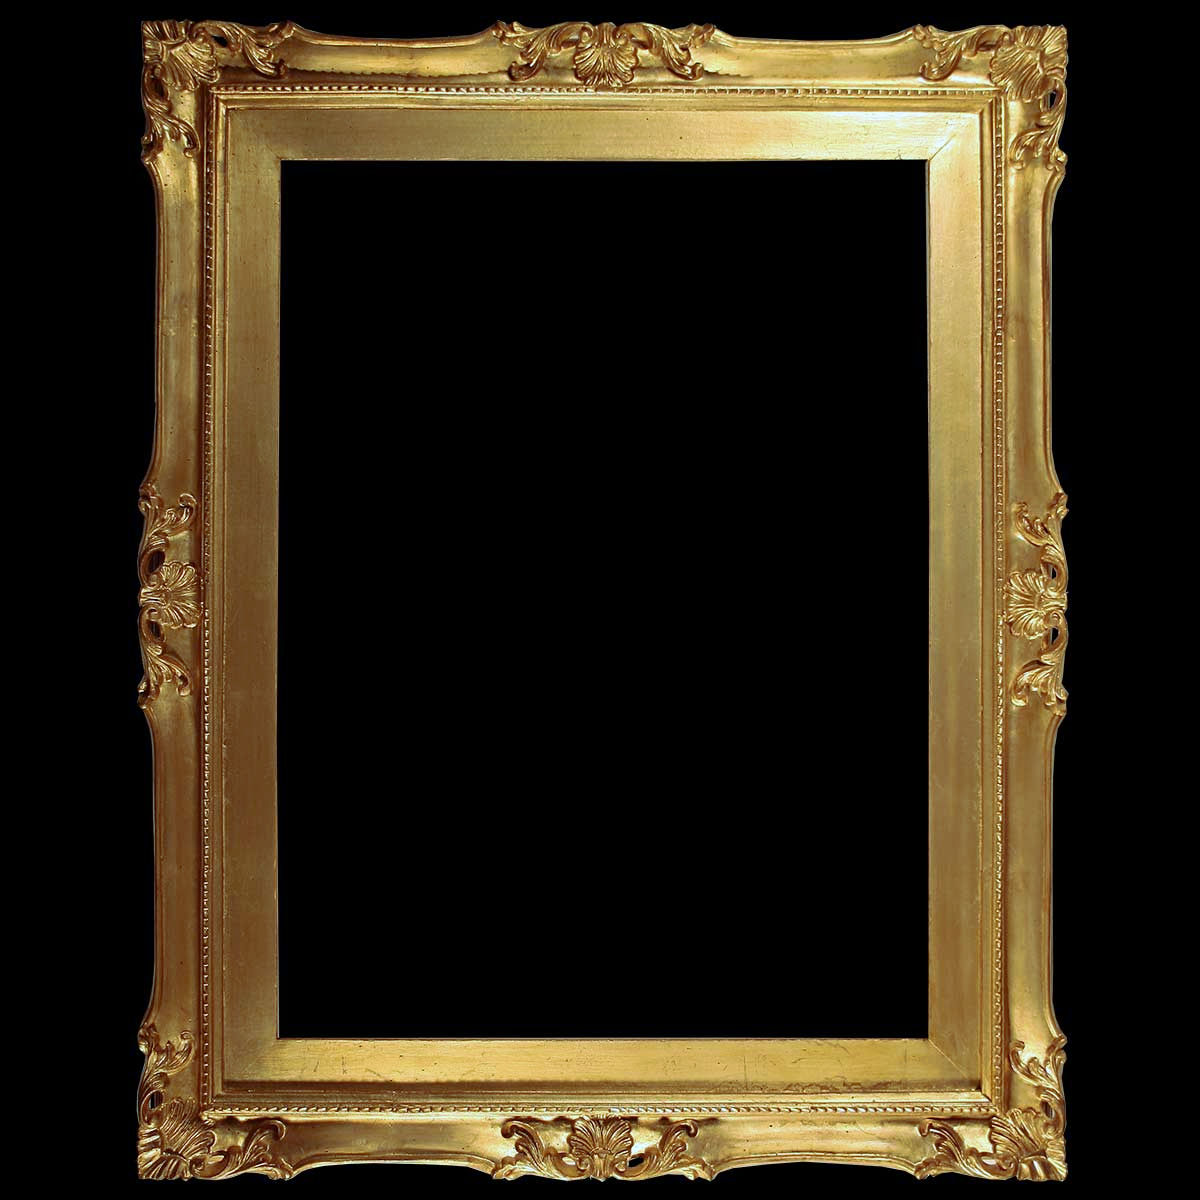 Picture Frames and Customization